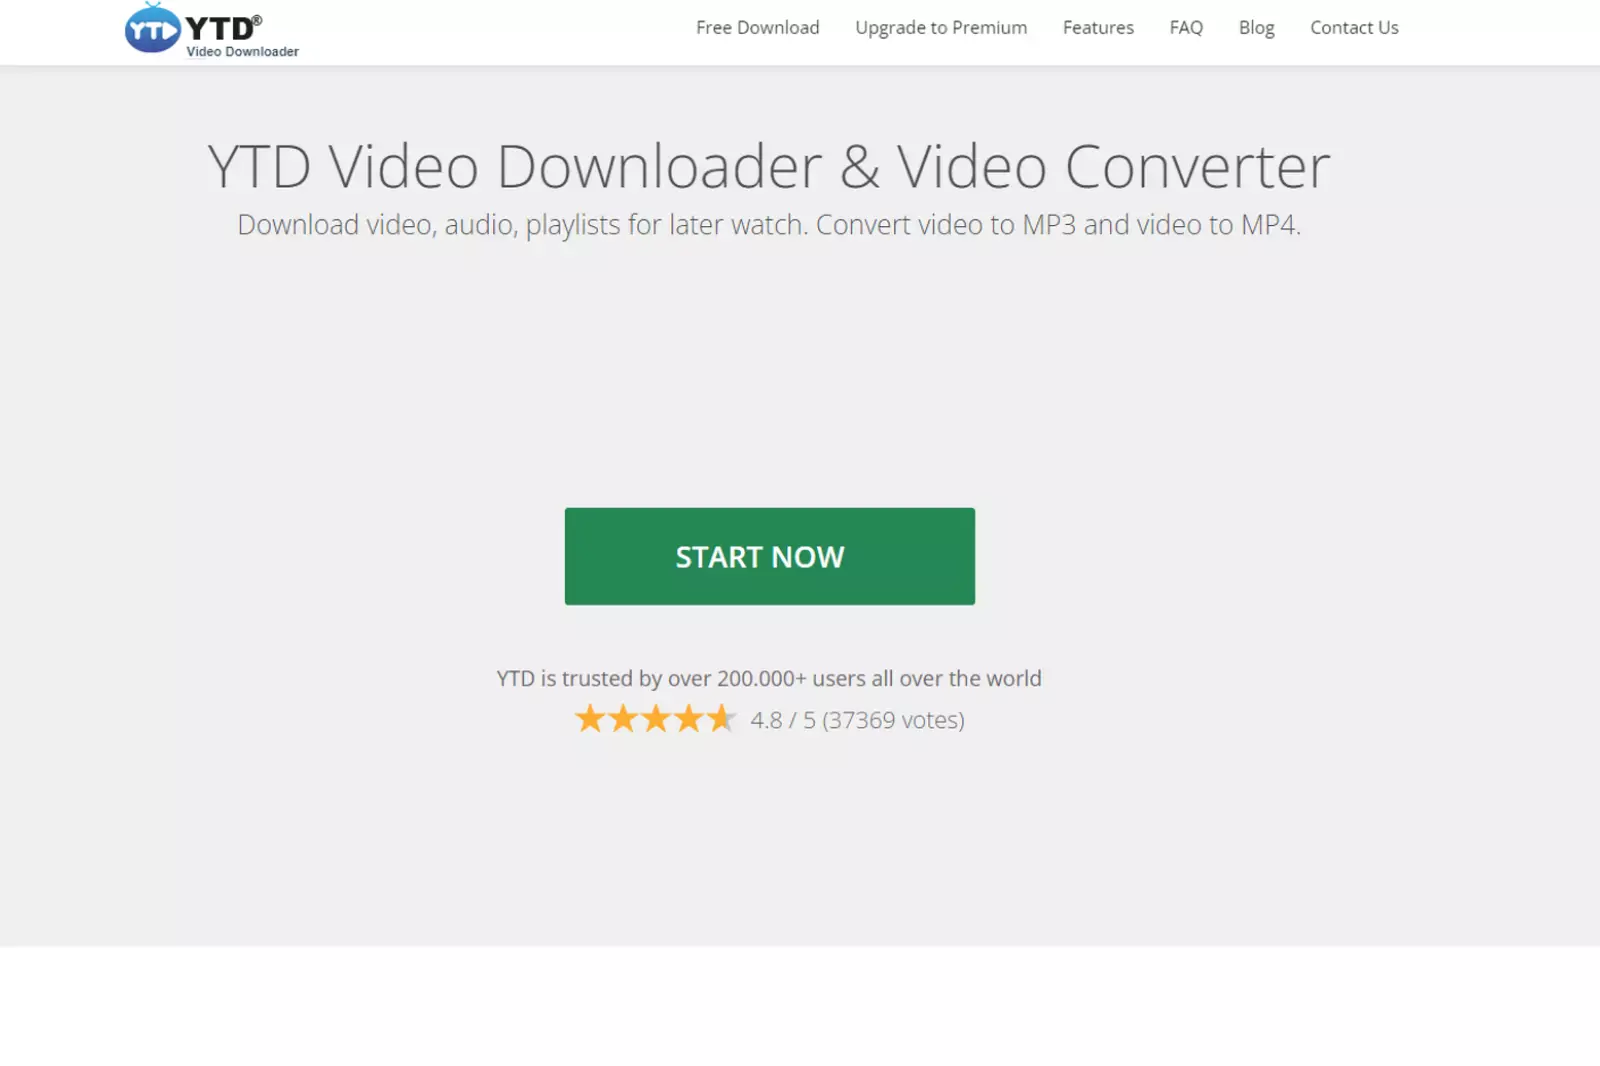 Home Page of YTD Video Downloader